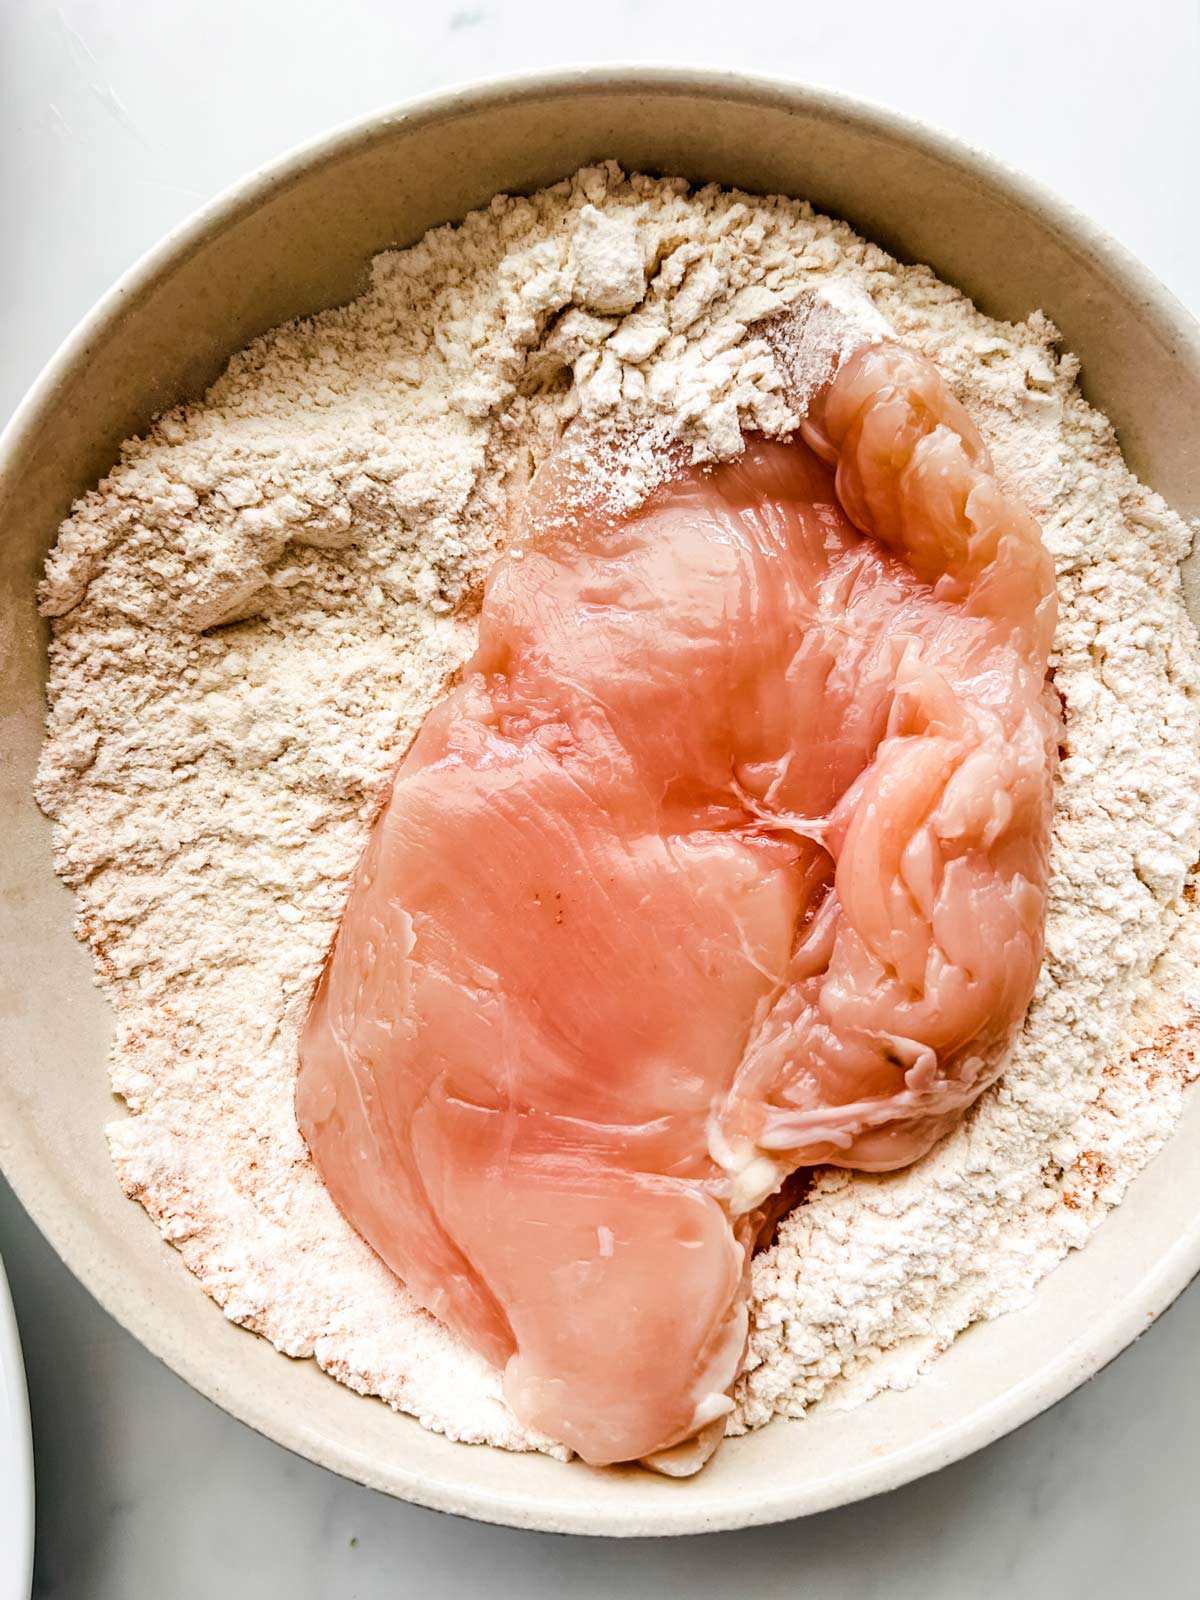 Chicken being dredged in a bowl of flour and seasonings.